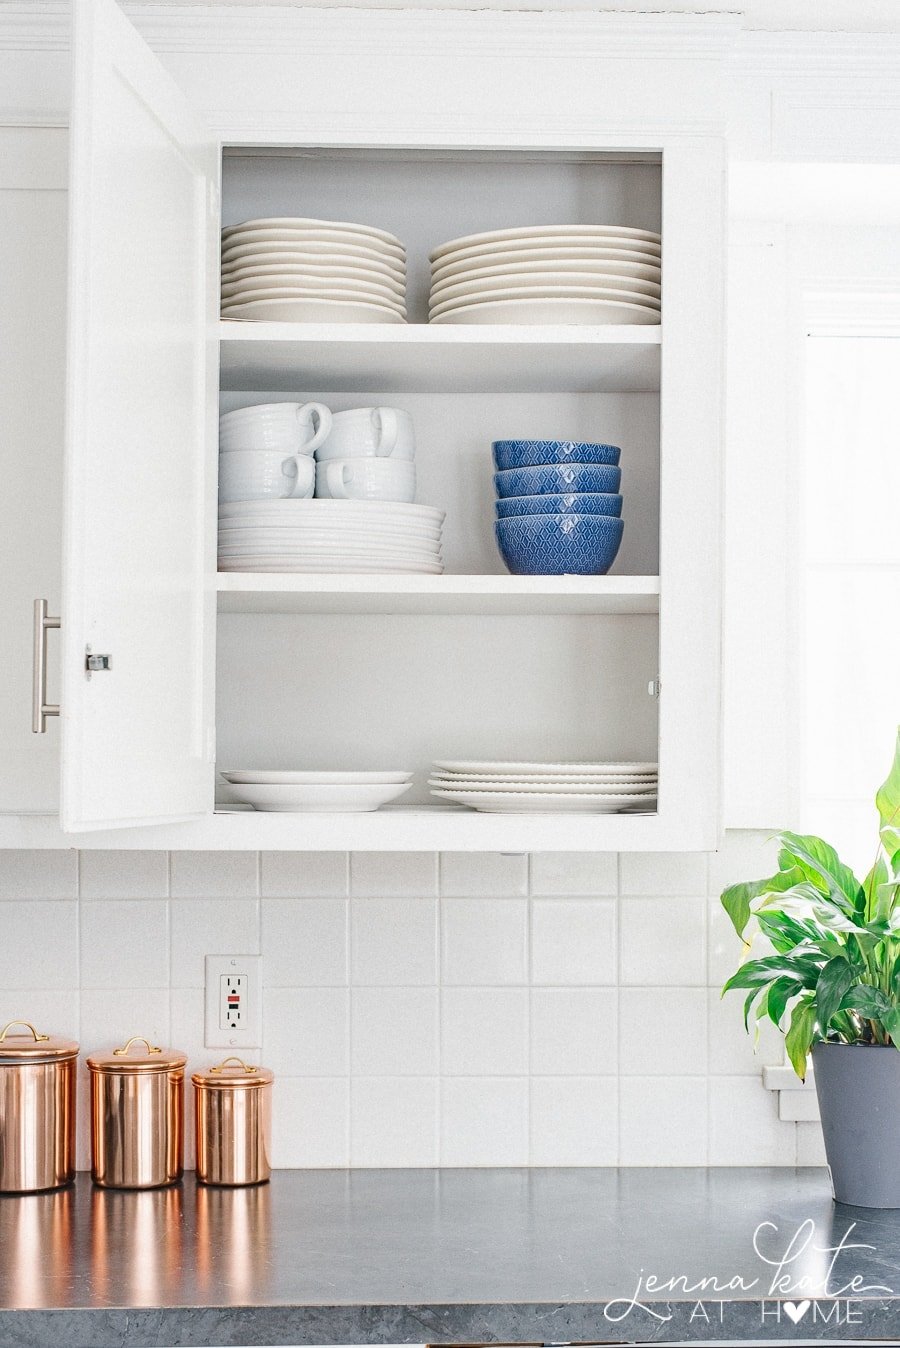 How to arrange dishes in kitchen cabinets